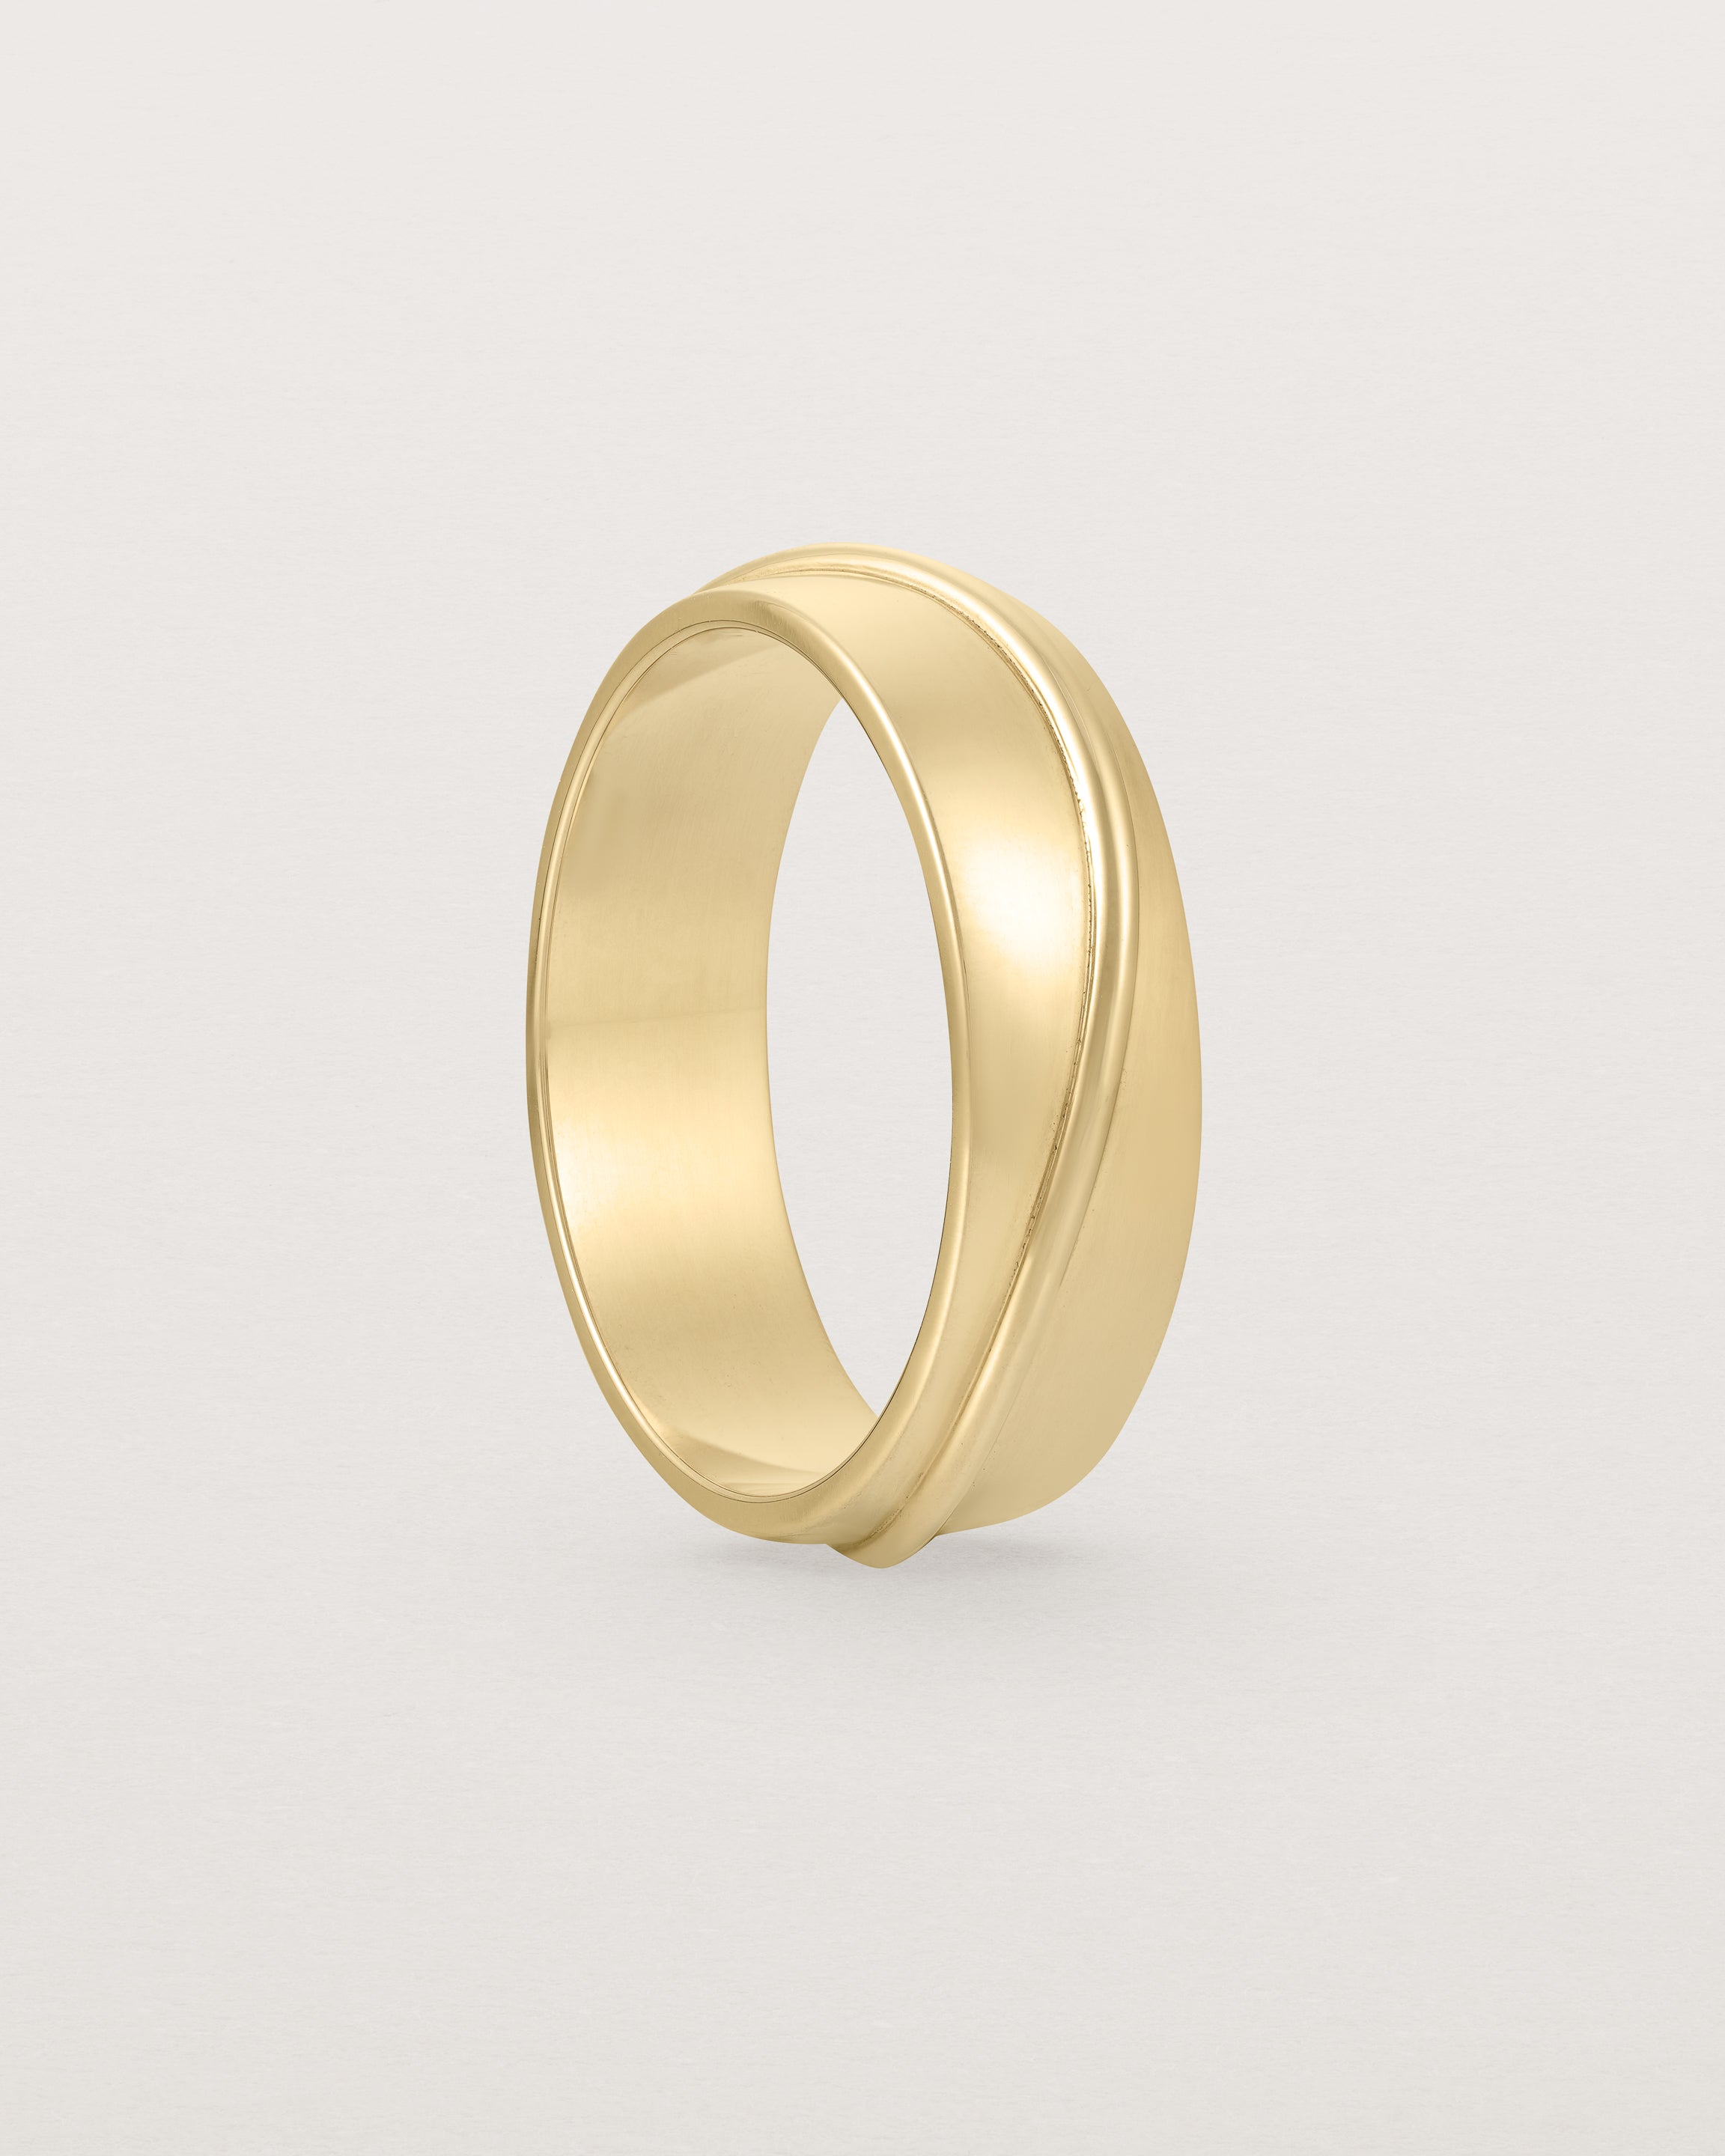 Standing view of the Surge Wedding Ring | 6mm | Yellow Gold.